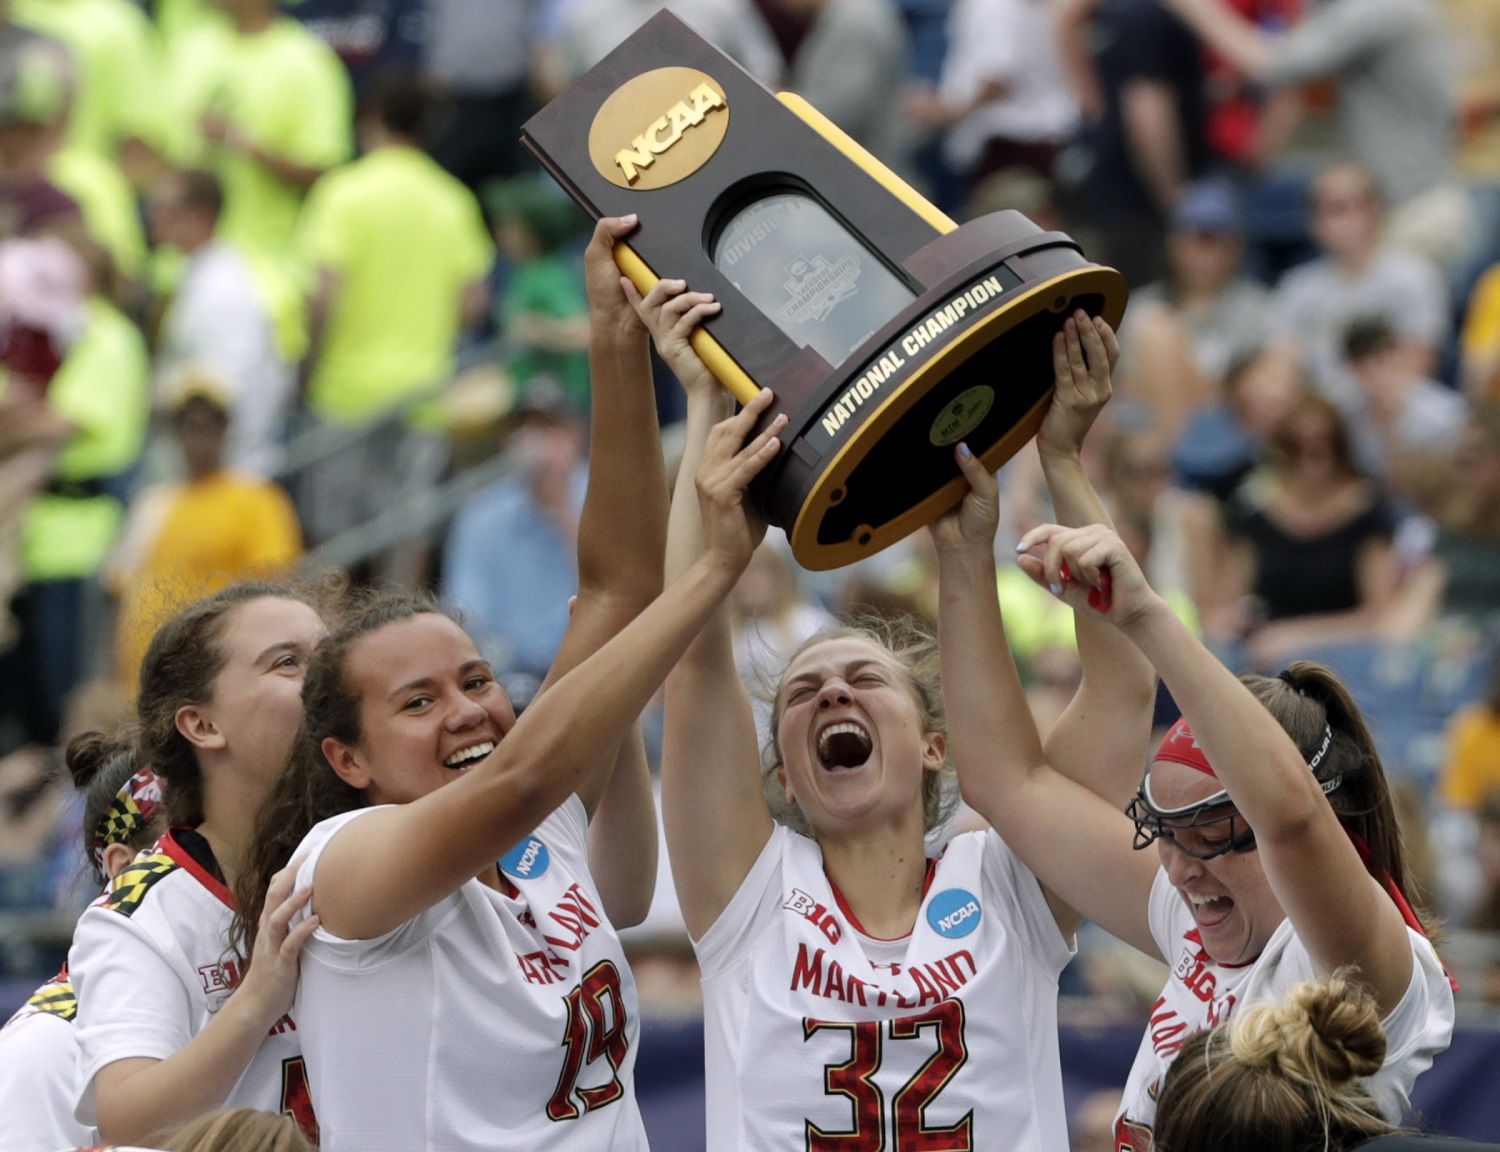 Maryland's Alex McKay (19), Bairre Reilly (32) and Meghan Doherty, far right, celebrate with the trophy after they defeated Boston College to win the NCAA college Division 1 lacrosse championship final, Sunday, May 28, 2017, in Foxborough, Mass. (AP Photo/Elise Amendola)